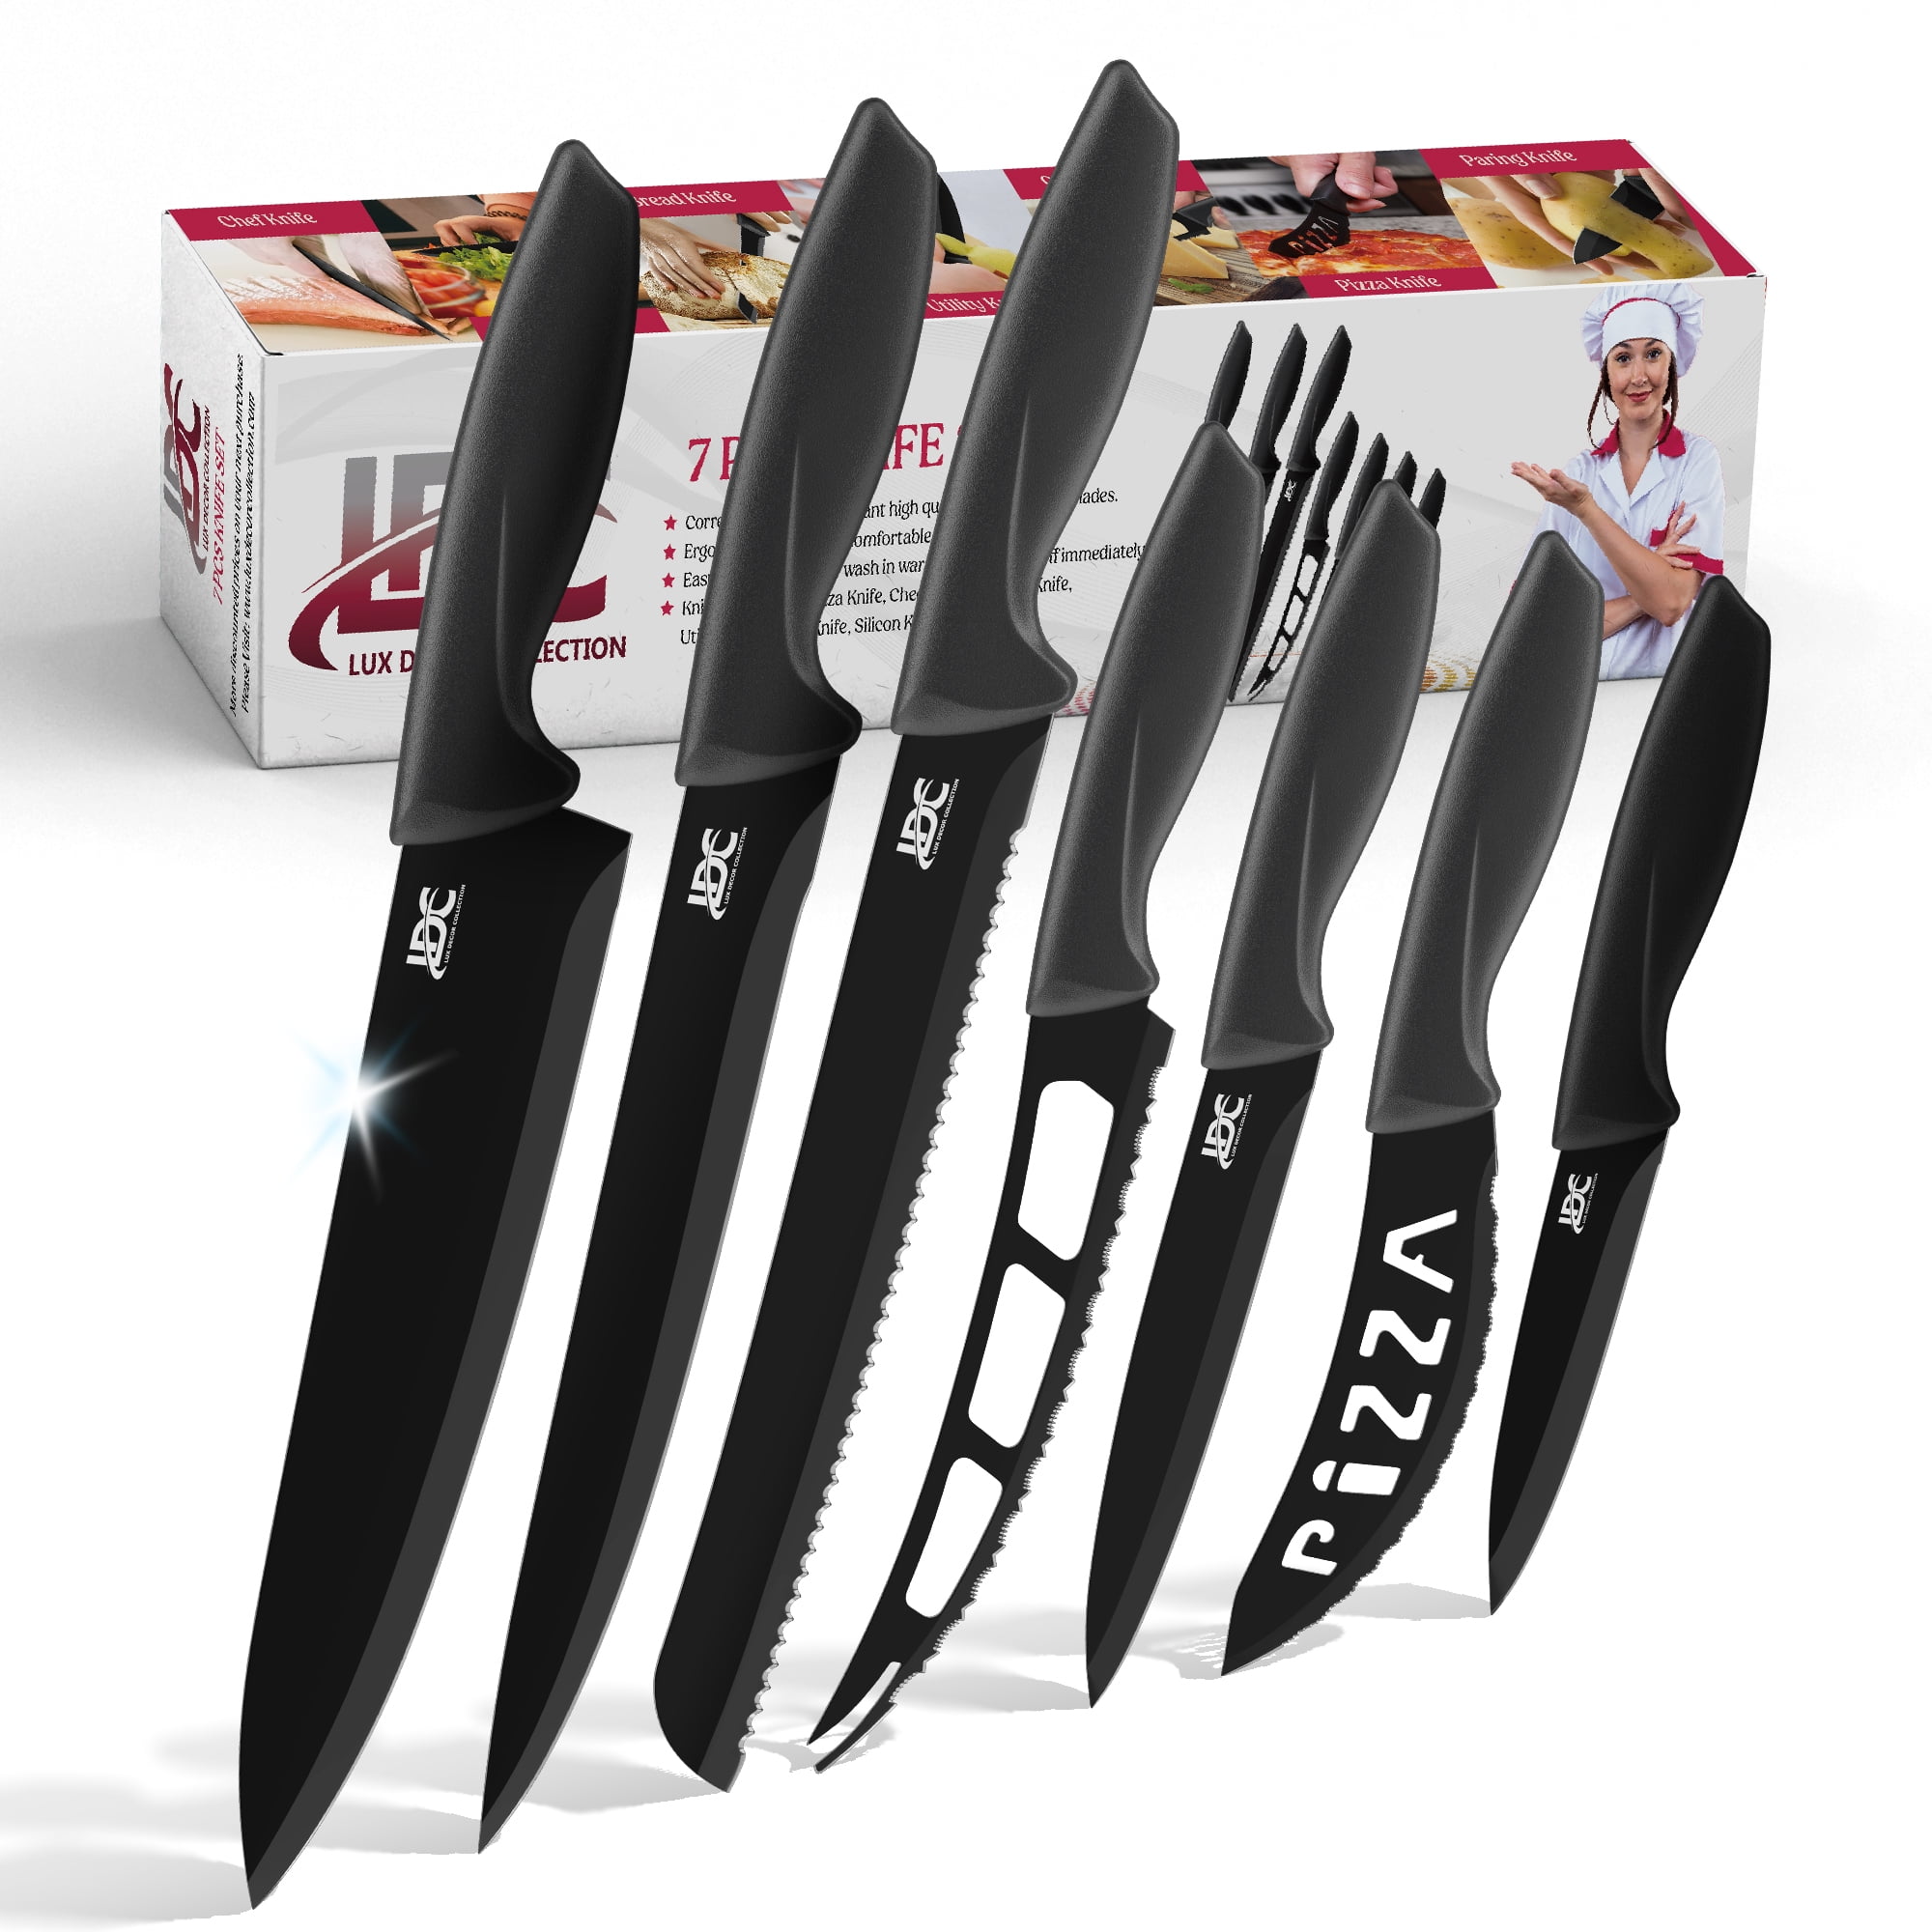 imarku 15PCS Kitchen Knife Set Review  apenese High Carbon Stainless Steel Knives  Set for Kitchen 